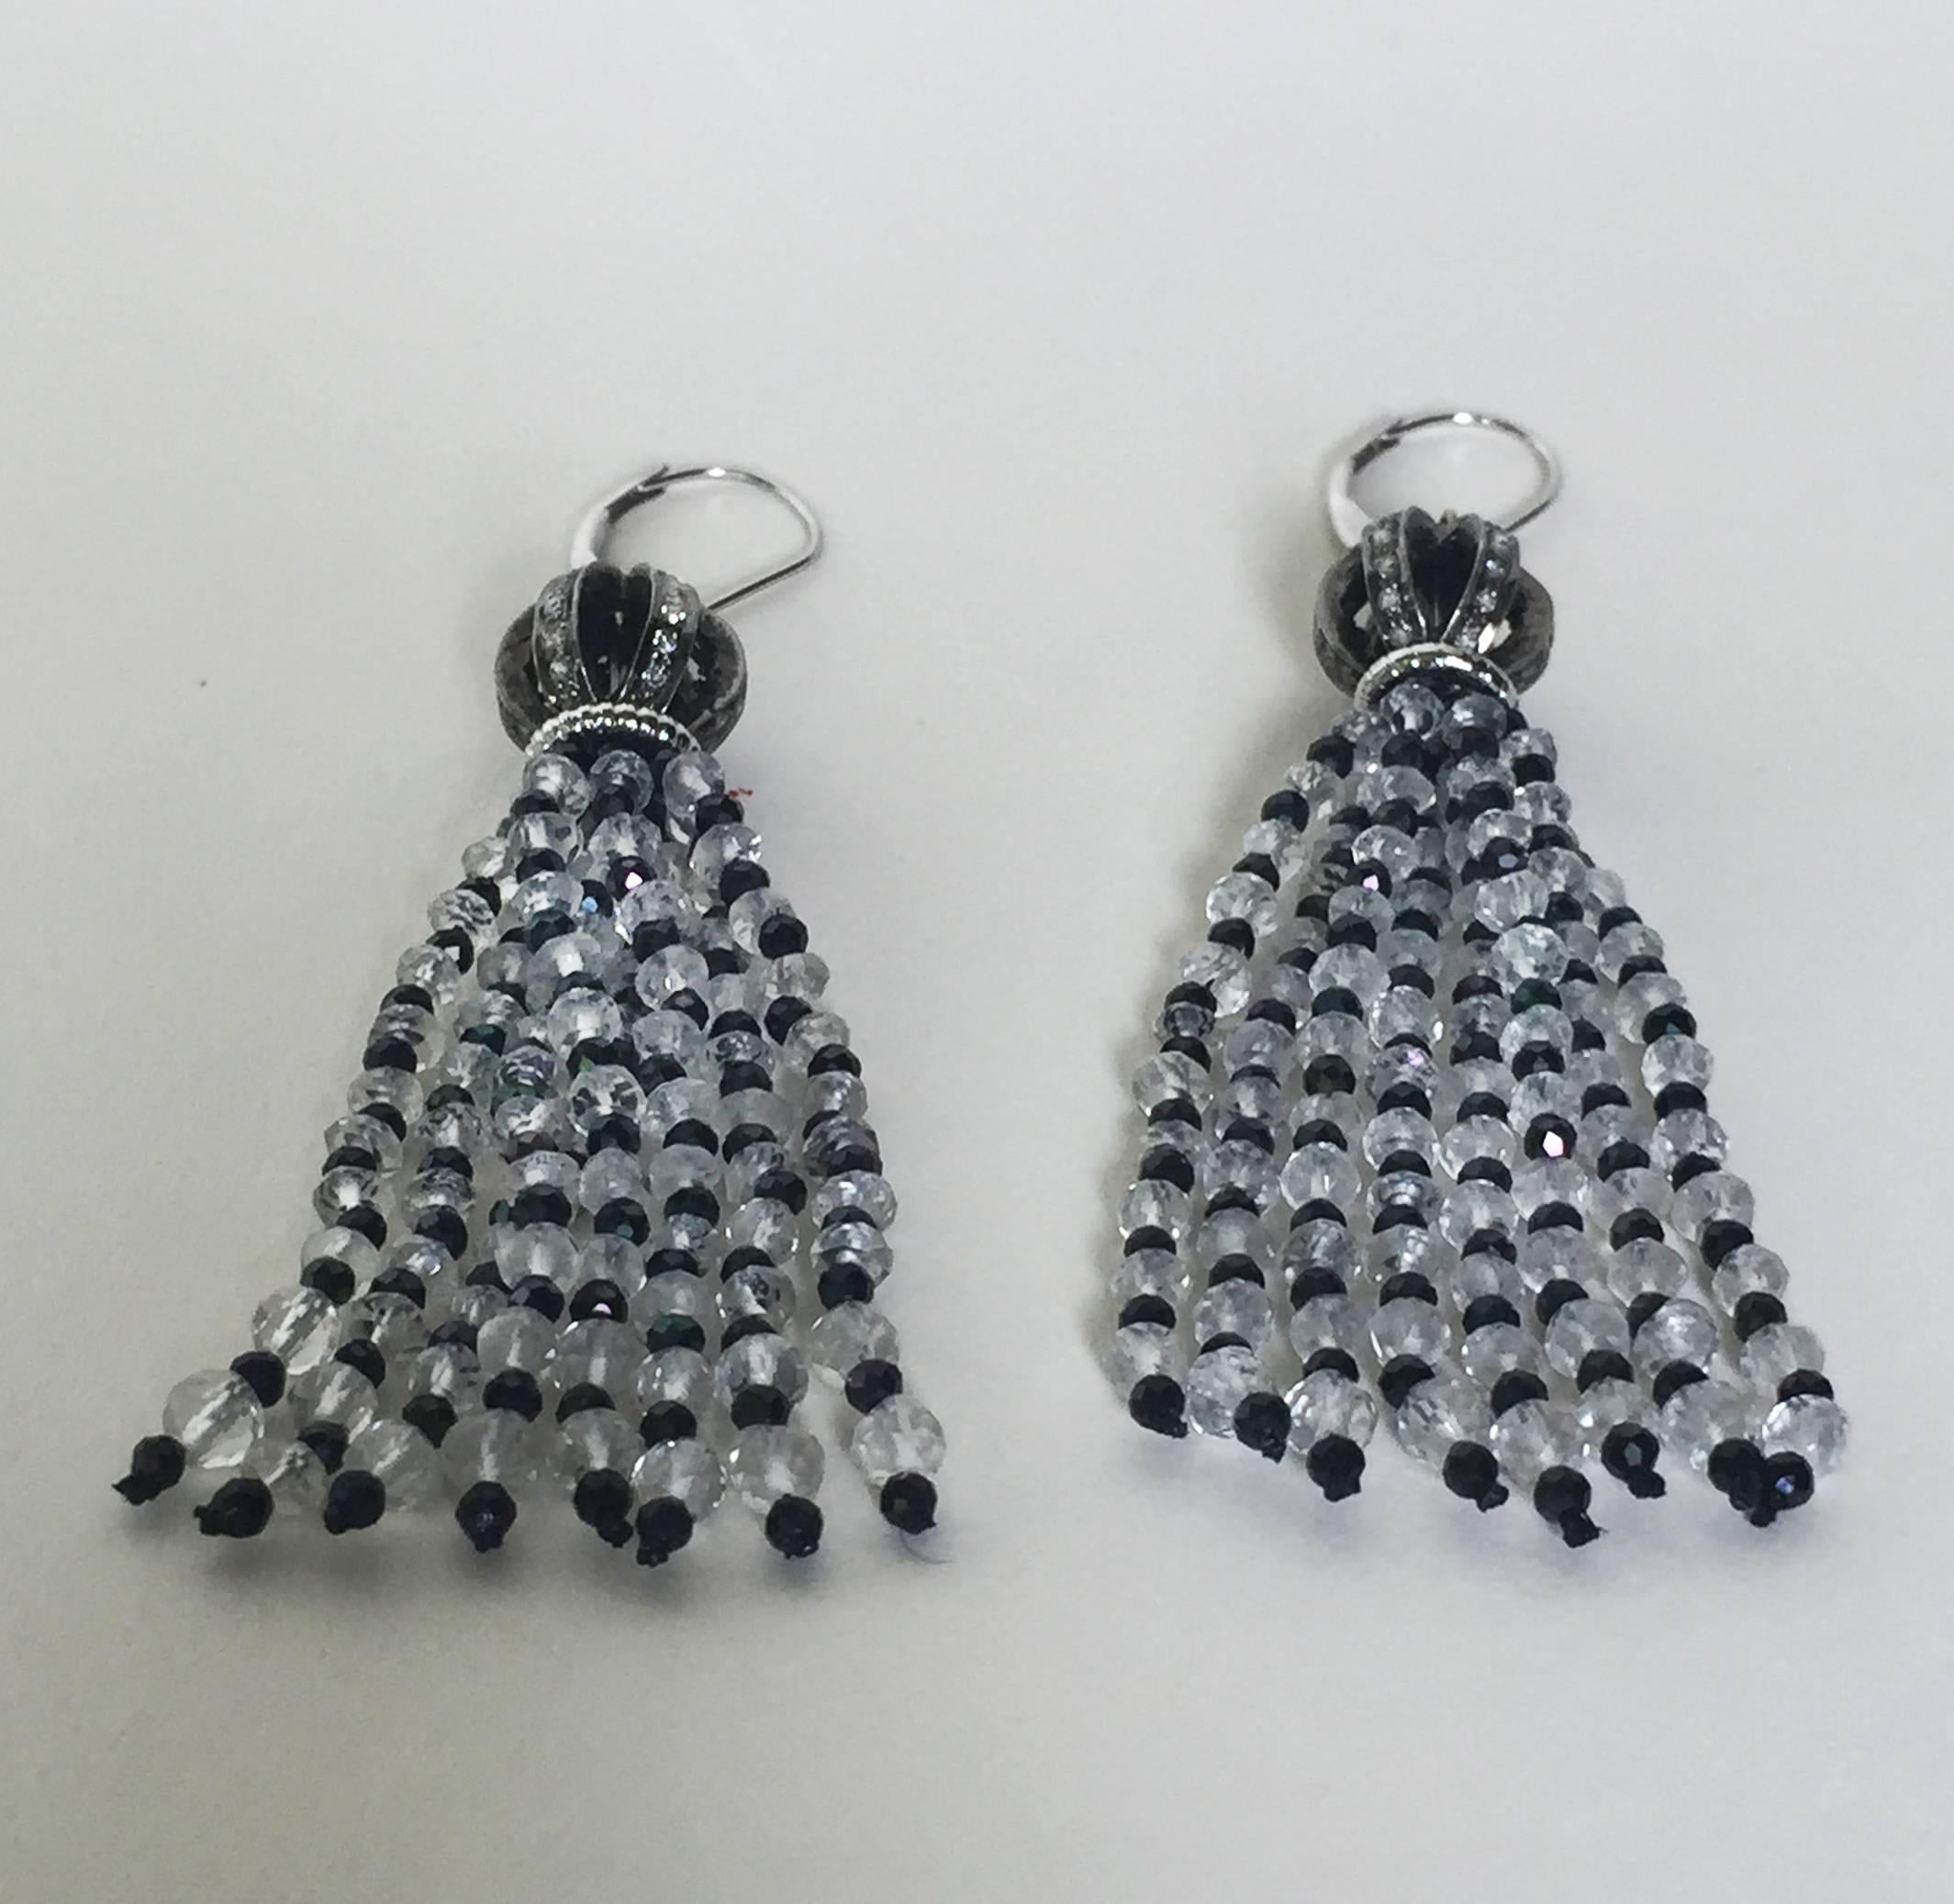 Bead Diamond Encrusted Ball Earrings with Quartz and Black Spinel Tassels by Marina J